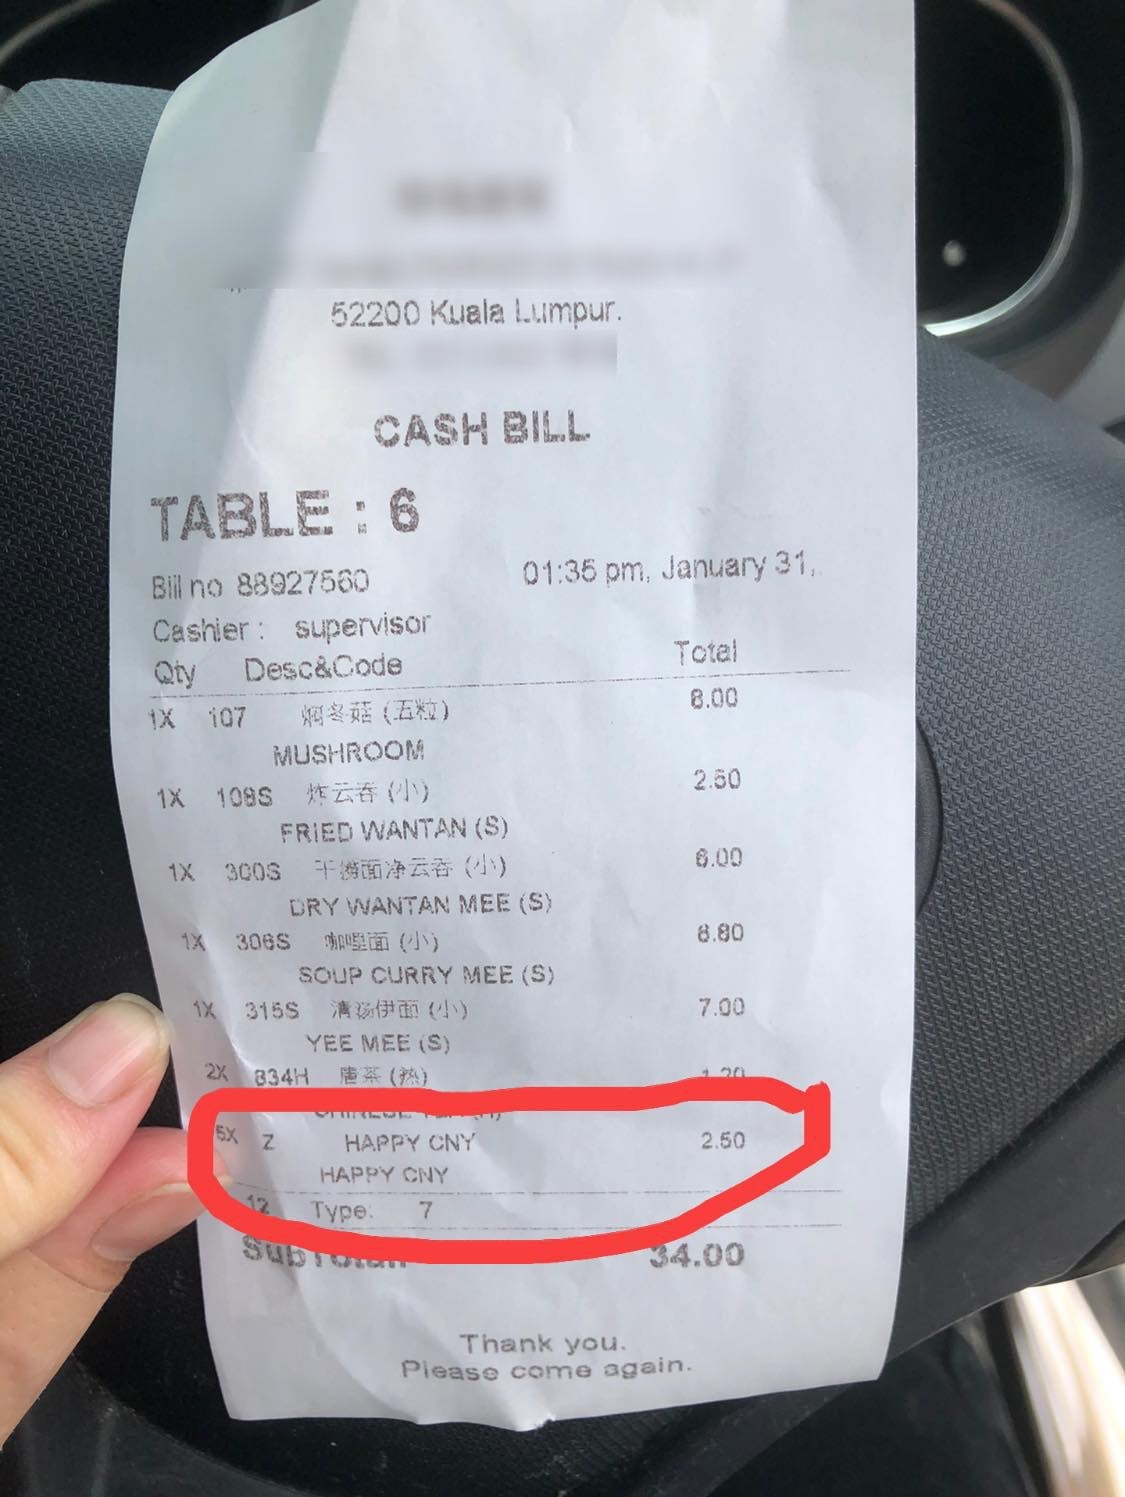 Woman Shares How A Restaurant In Kl Billed Her A &Quot;Happy Cny&Quot; - World Of Buzz